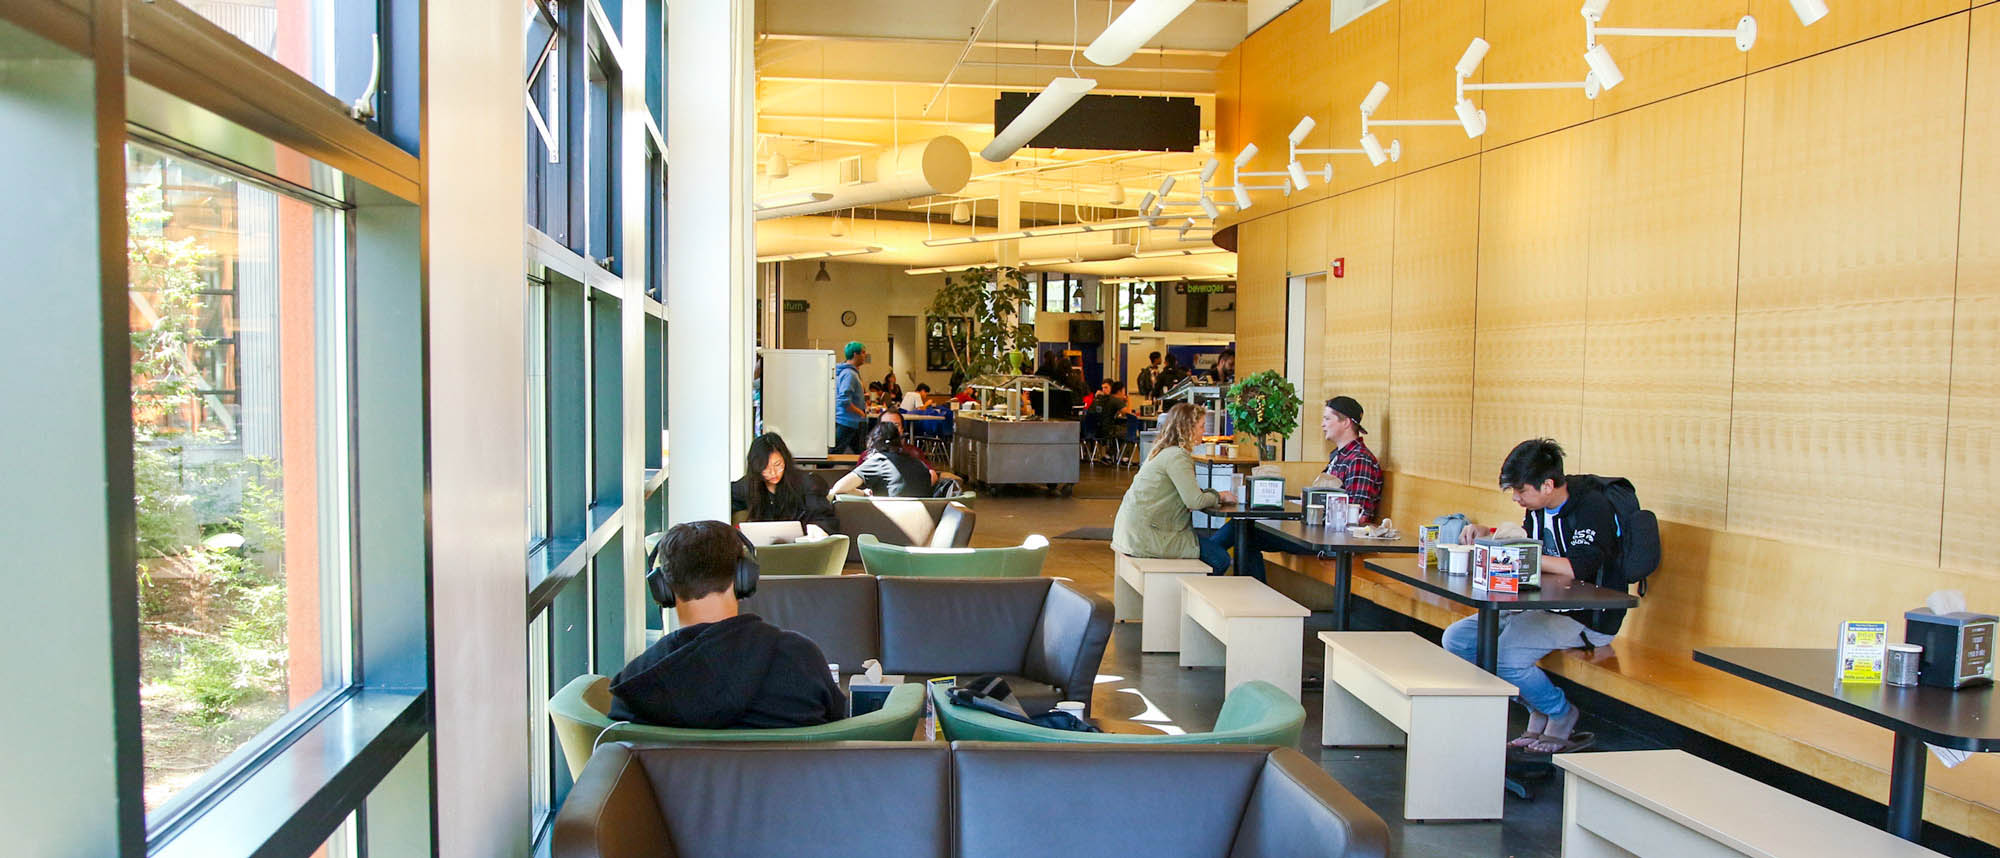 UCSC dining hall showing students eating, studying, and socializing